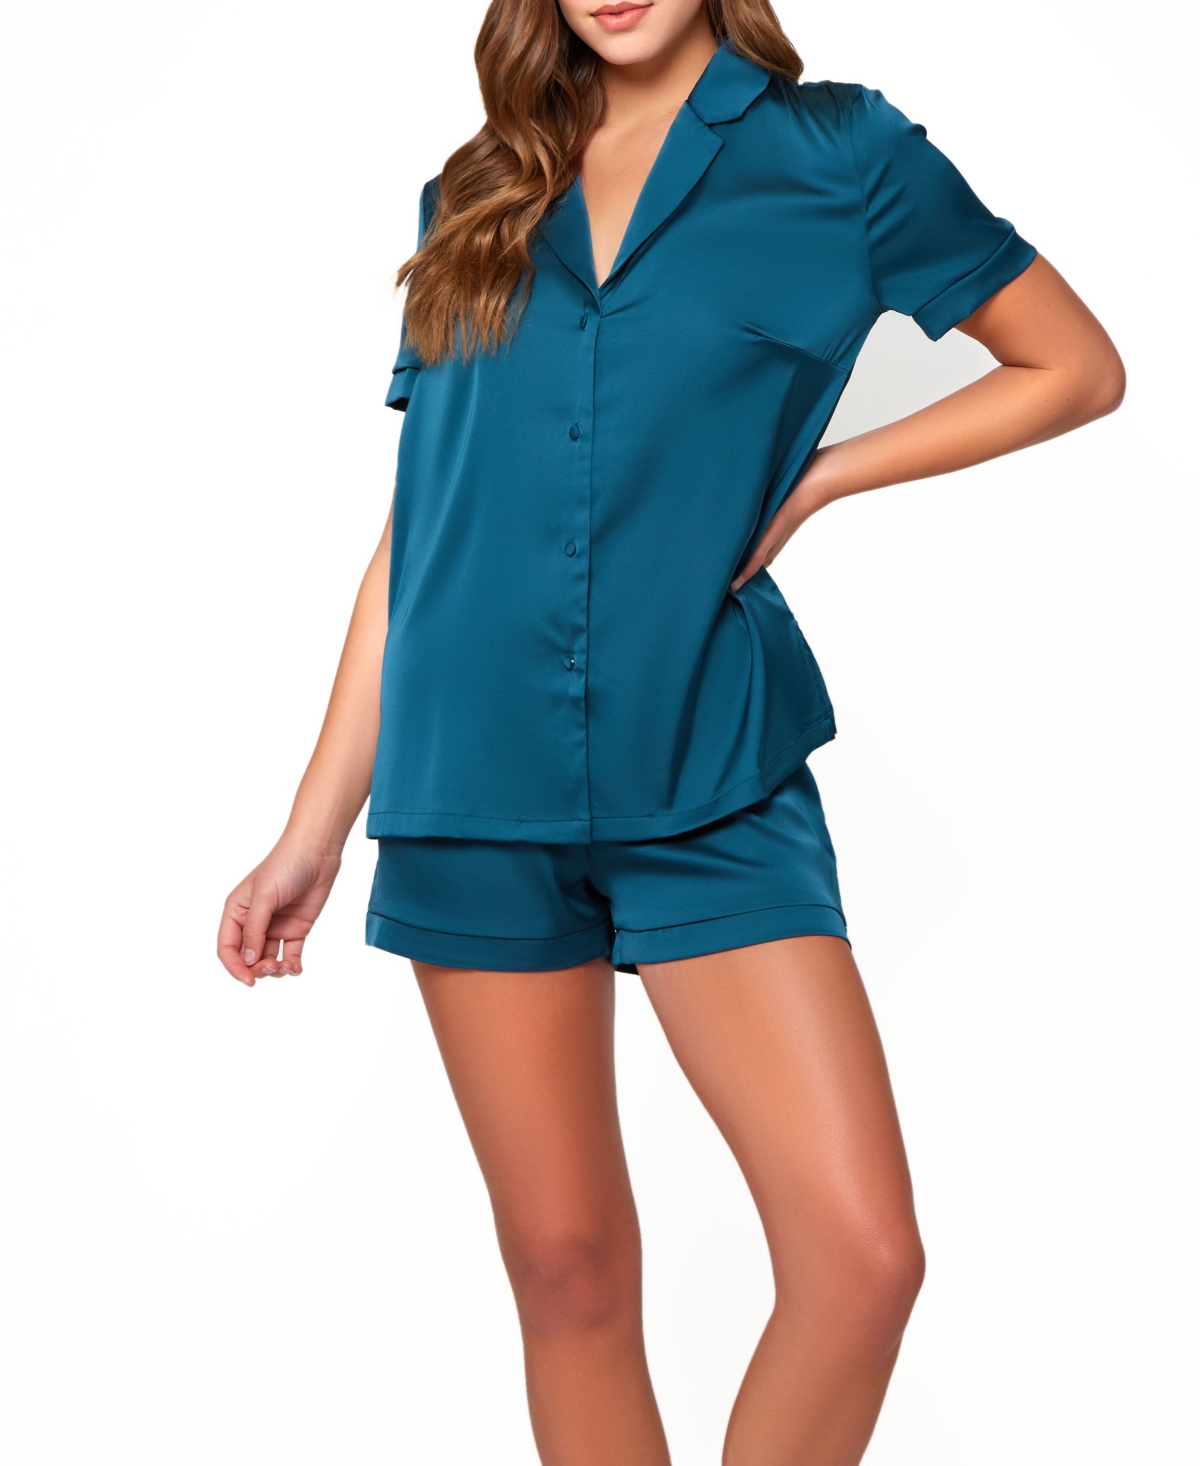 Women's Lucile Satin and Lace Short Sleeve Pajamas Set - Teal